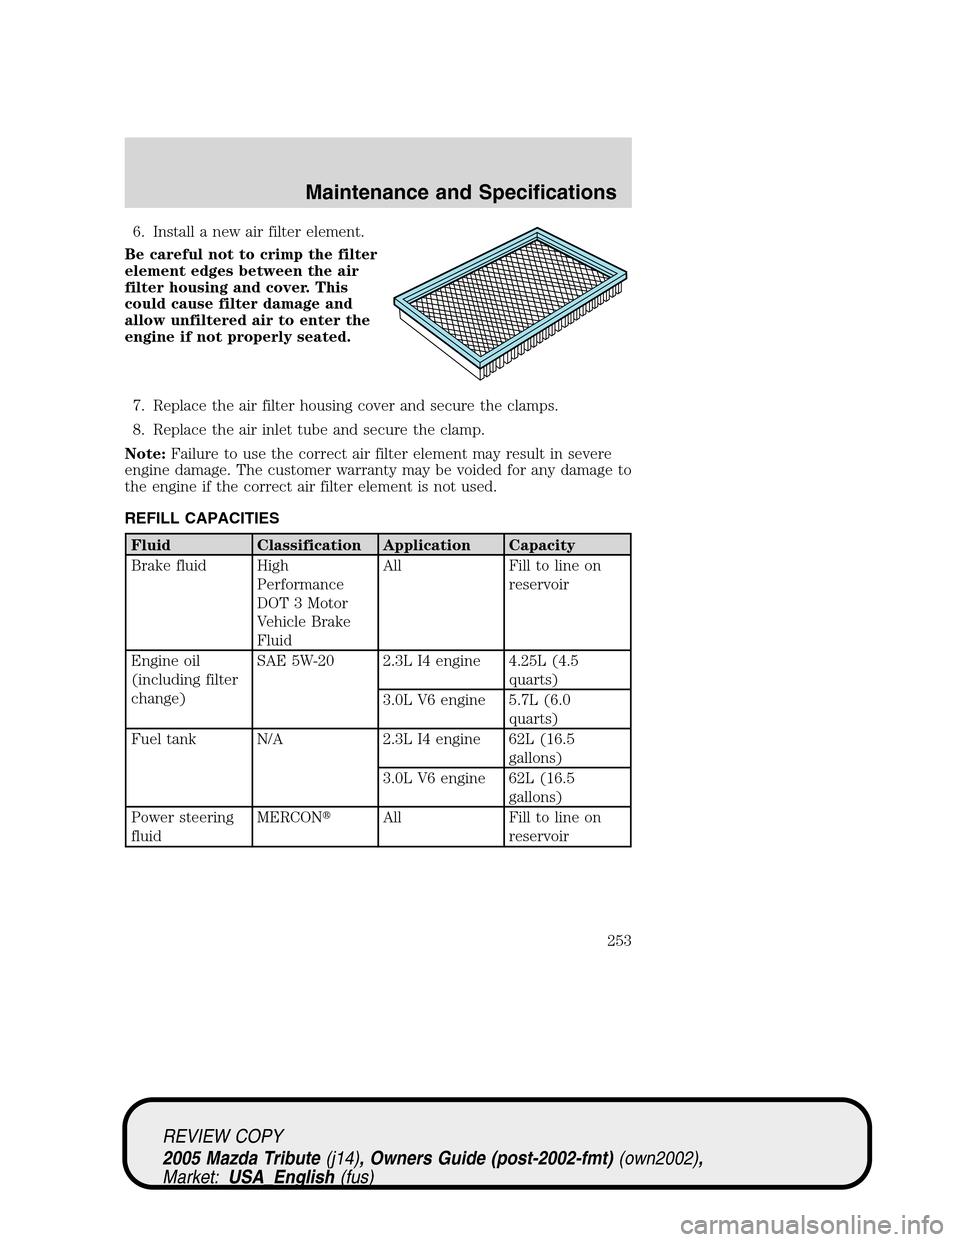 MAZDA MODEL TRIBUTE 2005  Owners Manual (in English) 6. Install a new air filter element.
Be careful not to crimp the filter
element edges between the air
filter housing and cover. This
could cause filter damage and
allow unfiltered air to enter the
eng